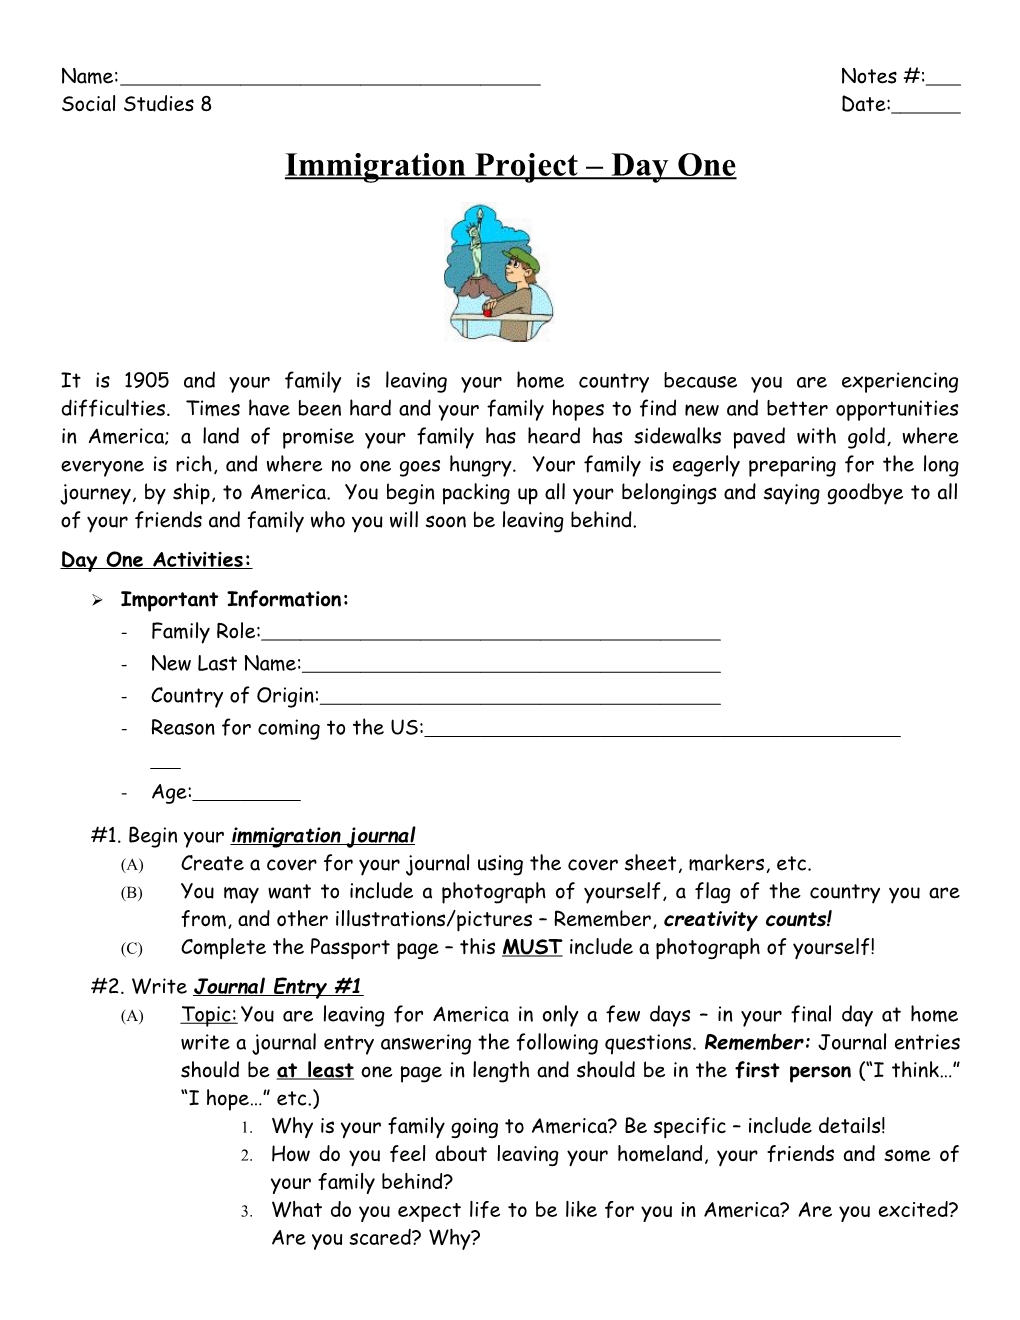 Immigration Family Activity: Counts As a Quarter 2 Test Grade